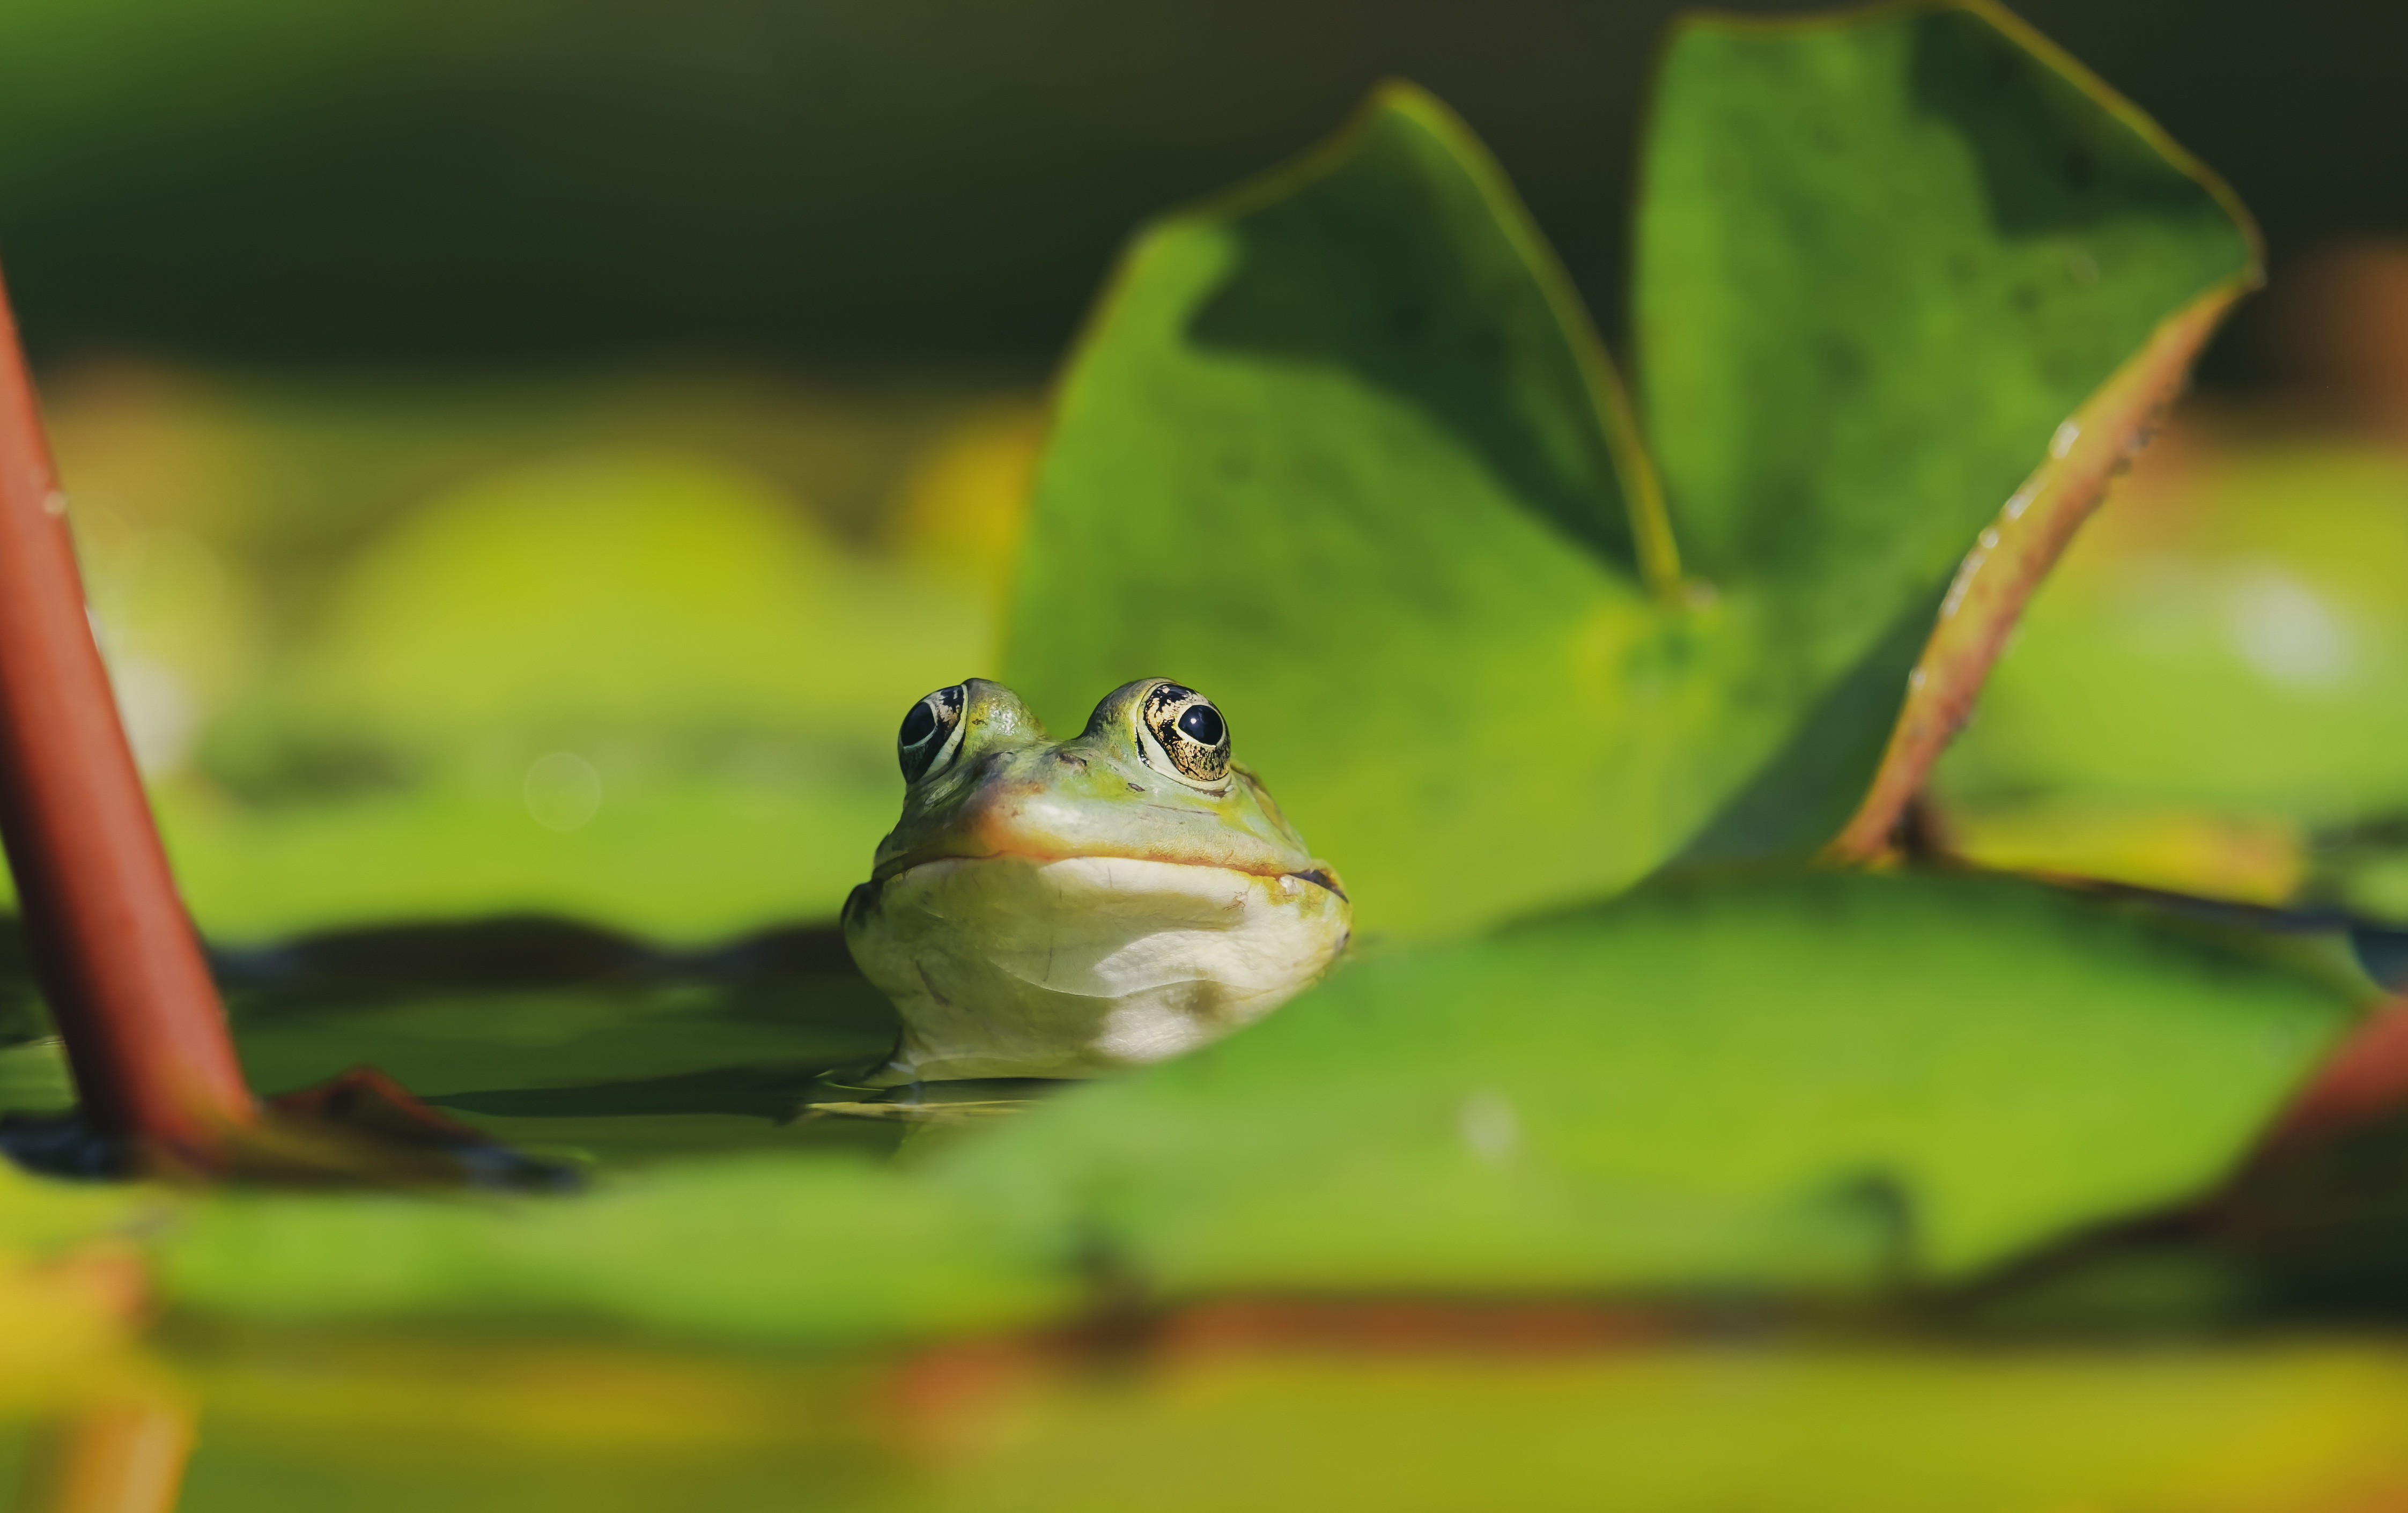 Green Frog Sitting in Water Lilly Leaves by Couleur